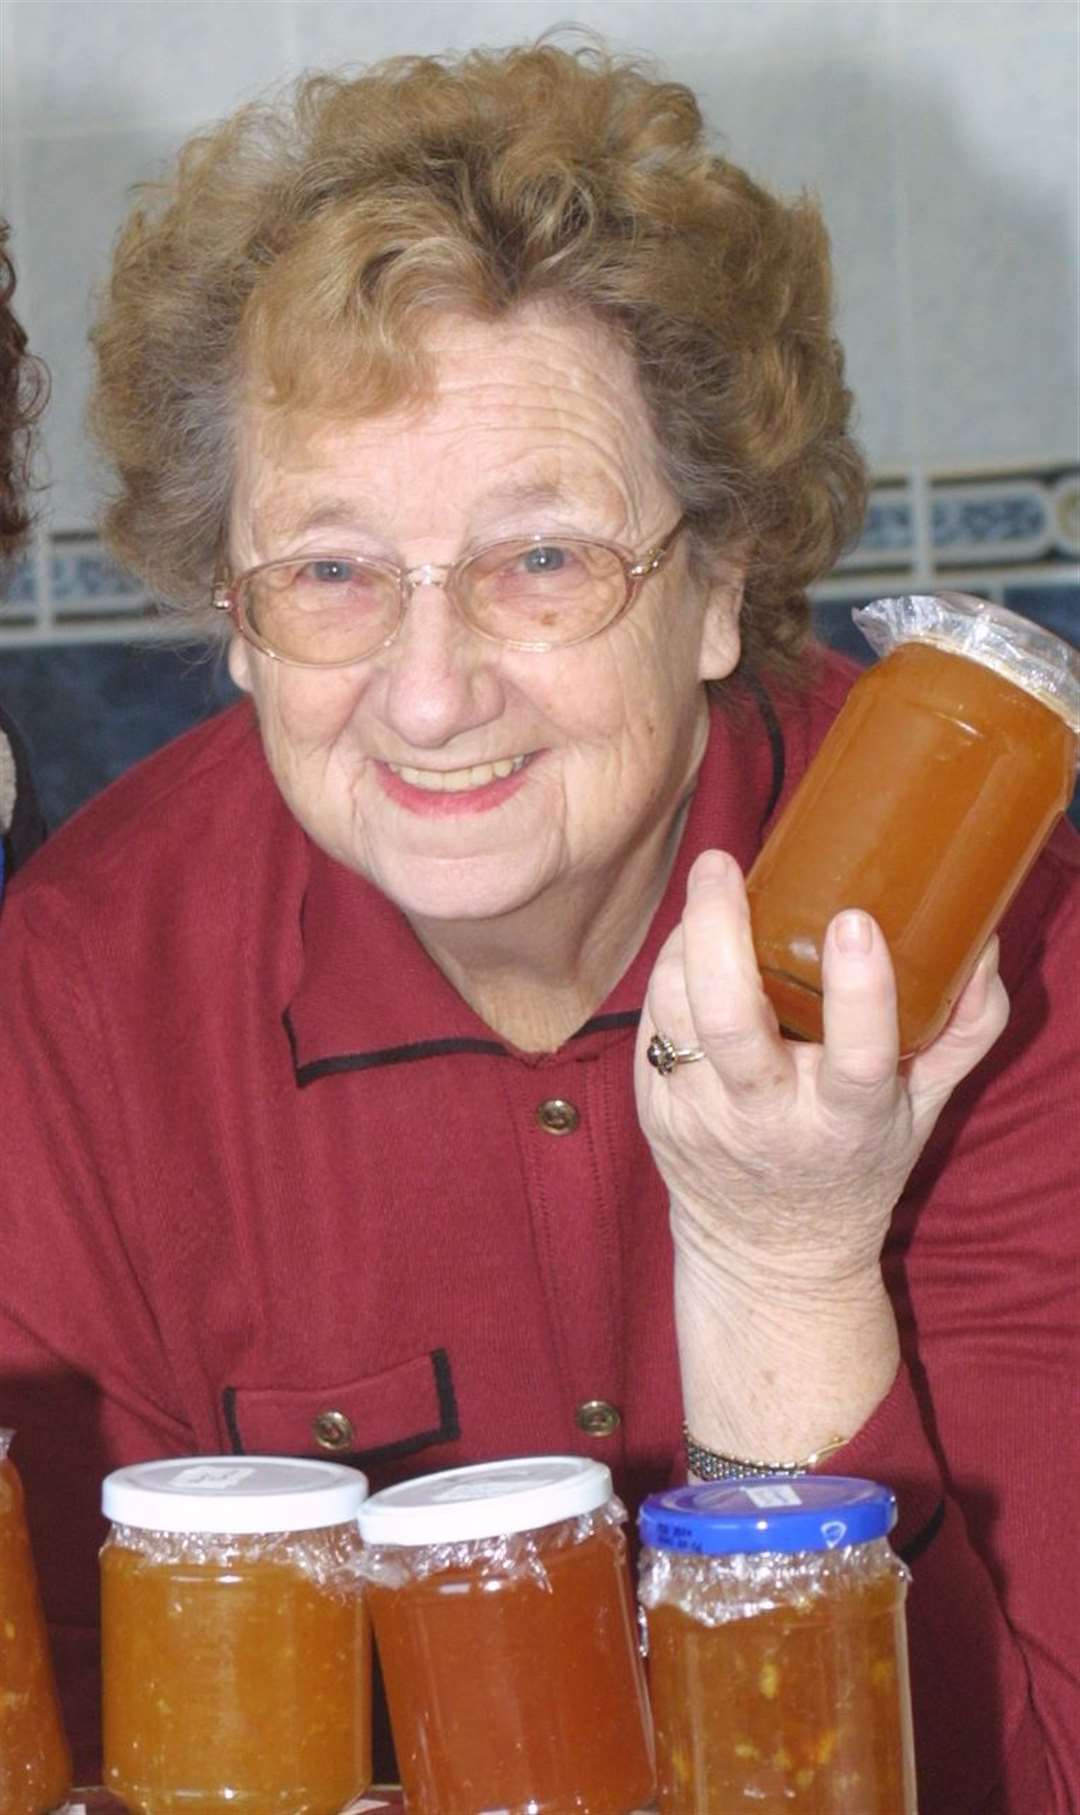 Pat Oakeshott with her fundraising marmalade. Much of it raised money for ellenor hospice but this batch was to support the Stop Cliffe Airport campaign, a proposal which threatened the area.